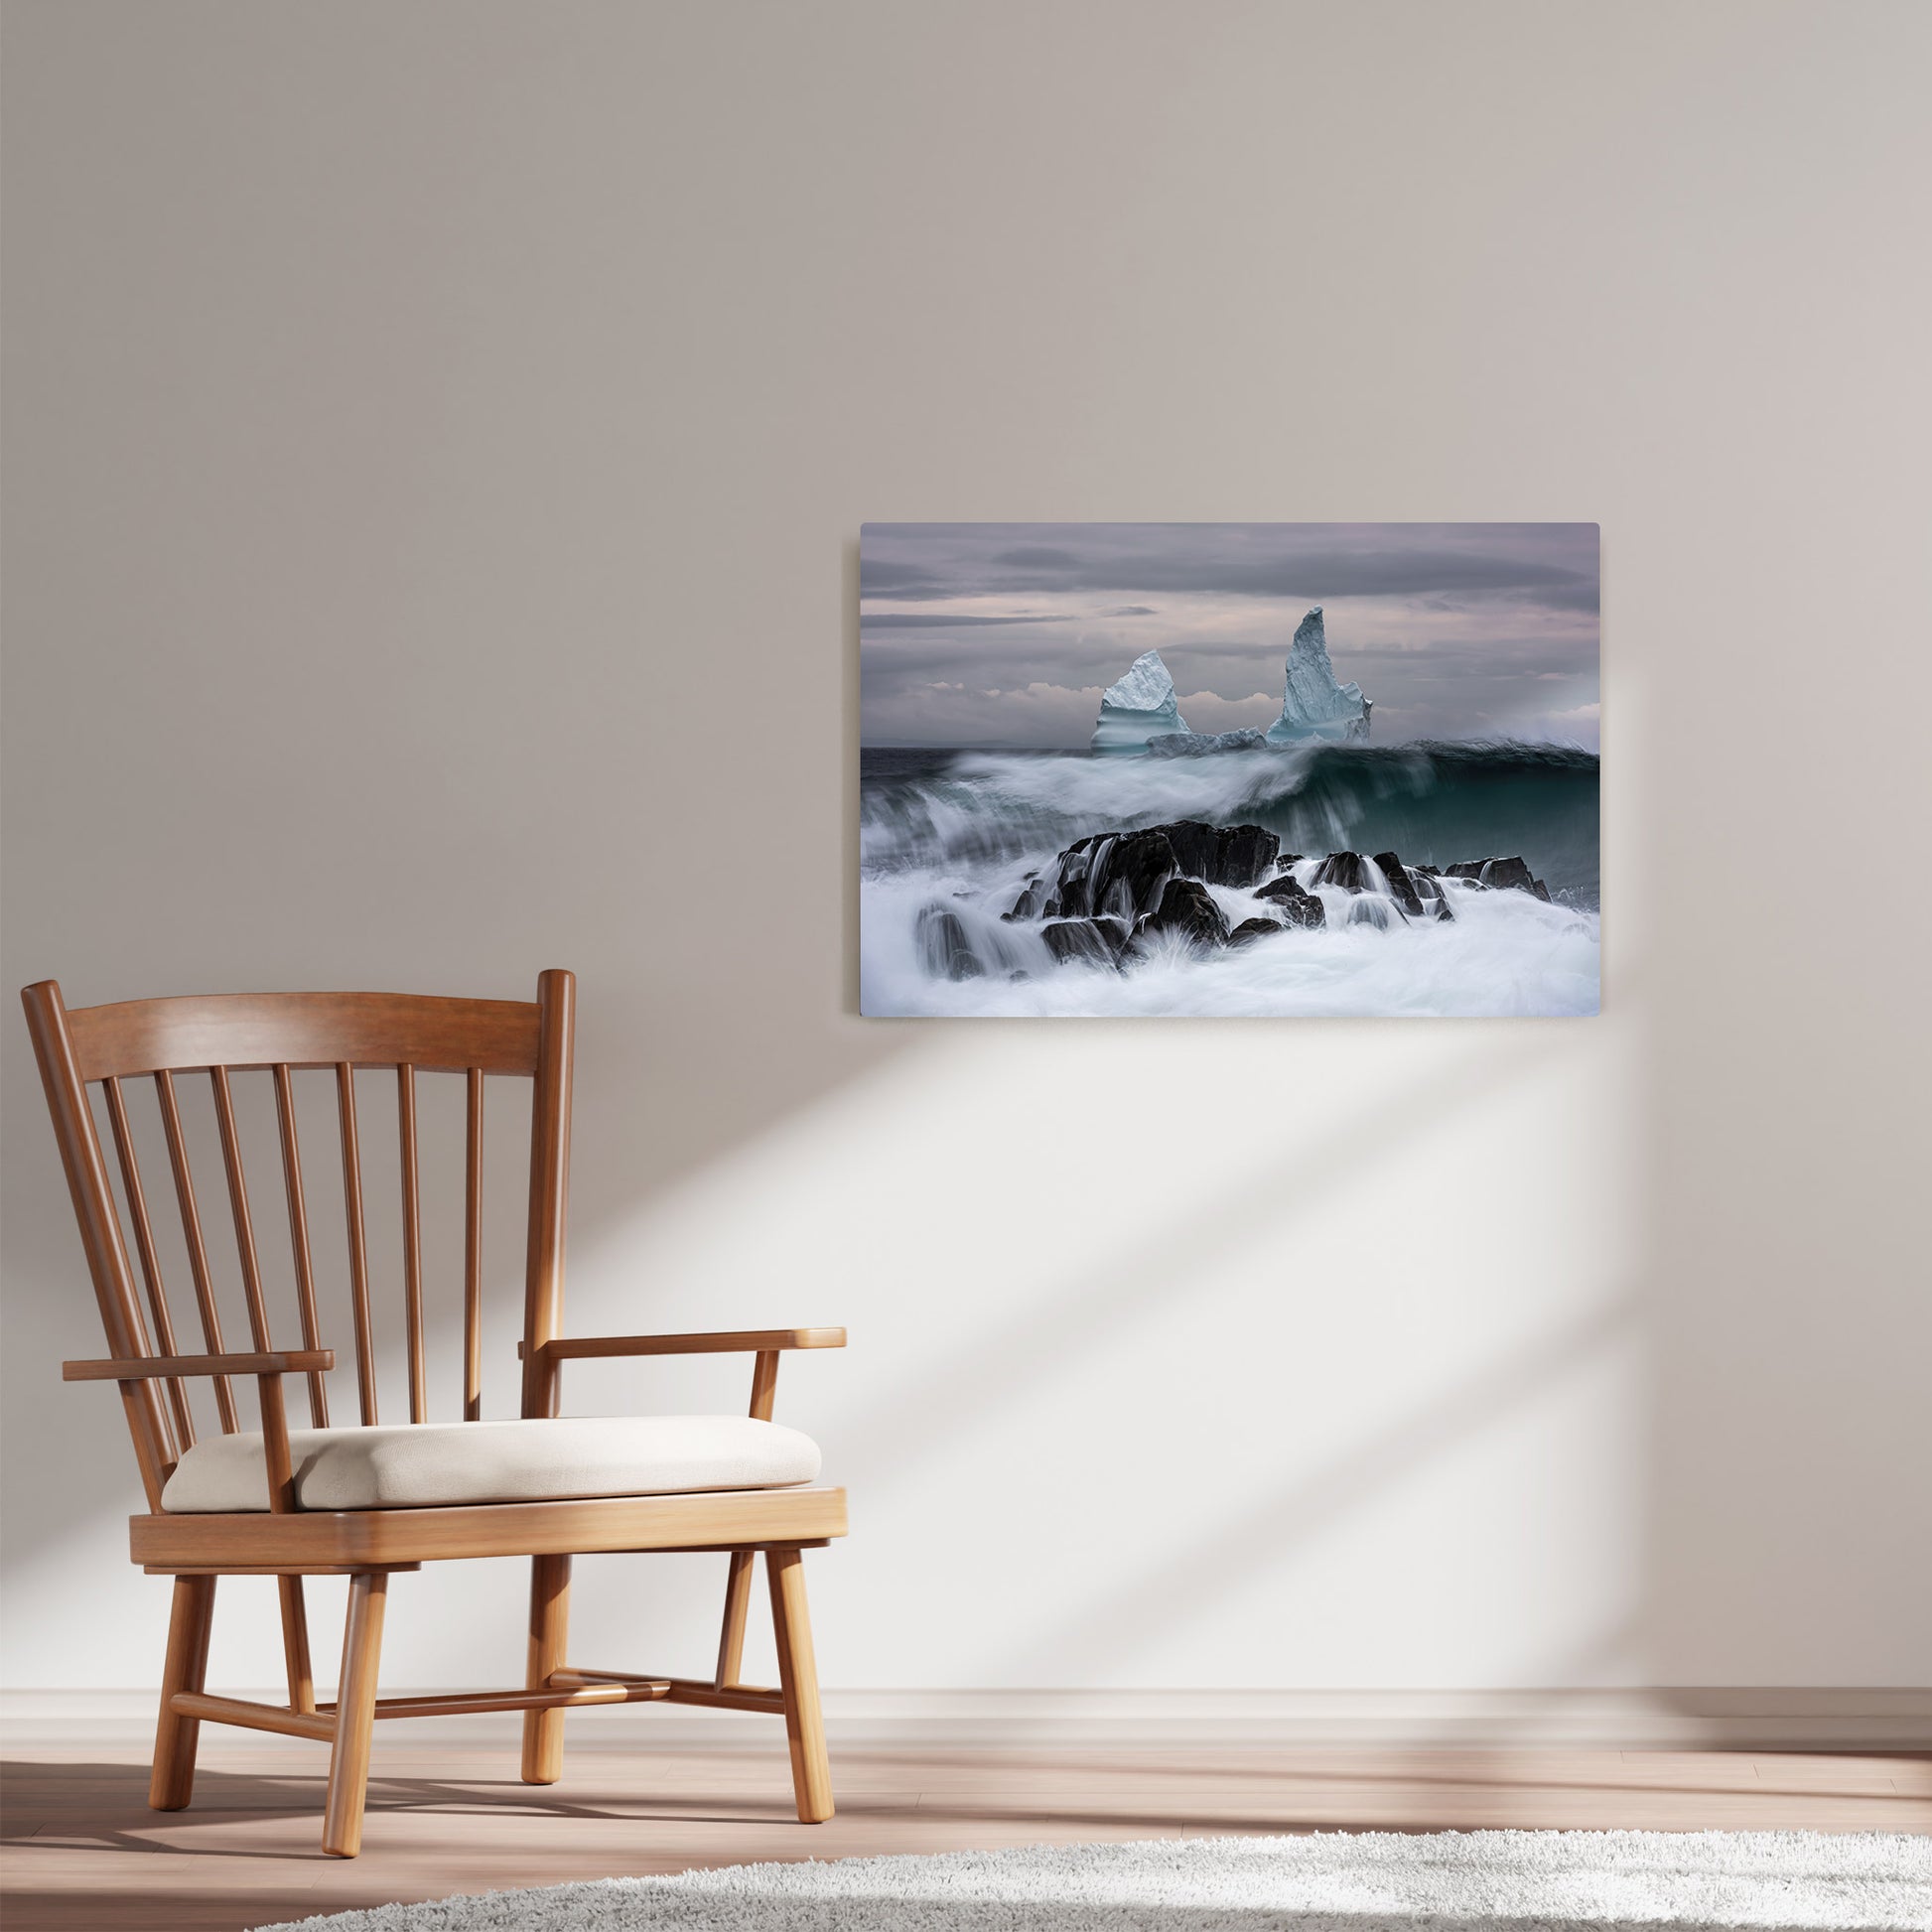 Ray Mackey's Sibleys Cove Shoreline photography reproduced on HD metal print and displayed on wall